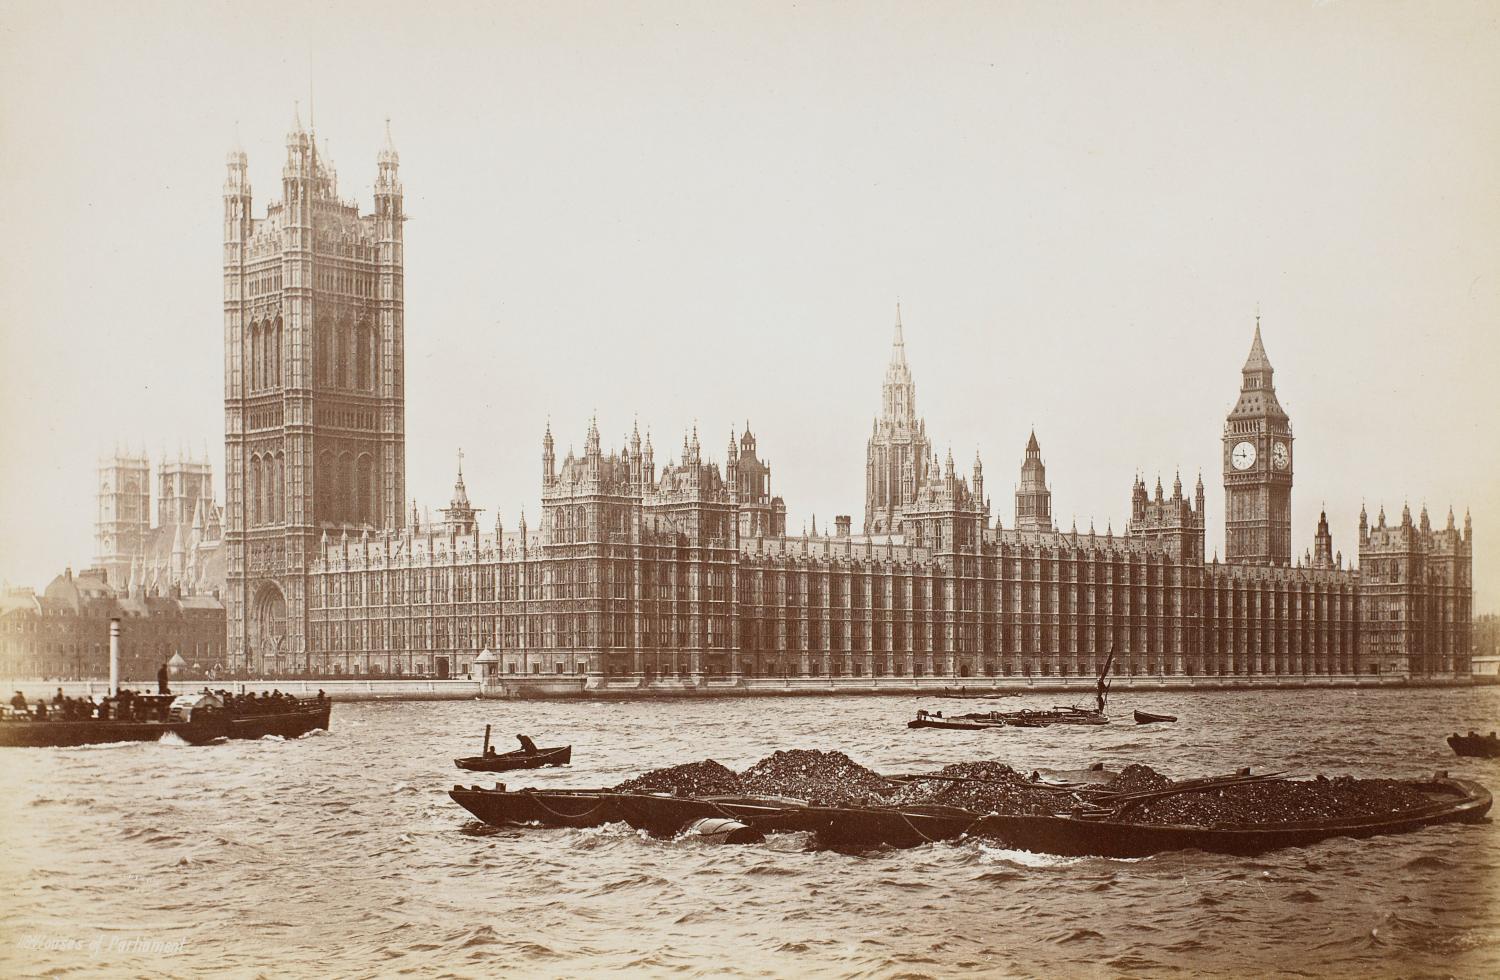 Image of parliament buildings in London.